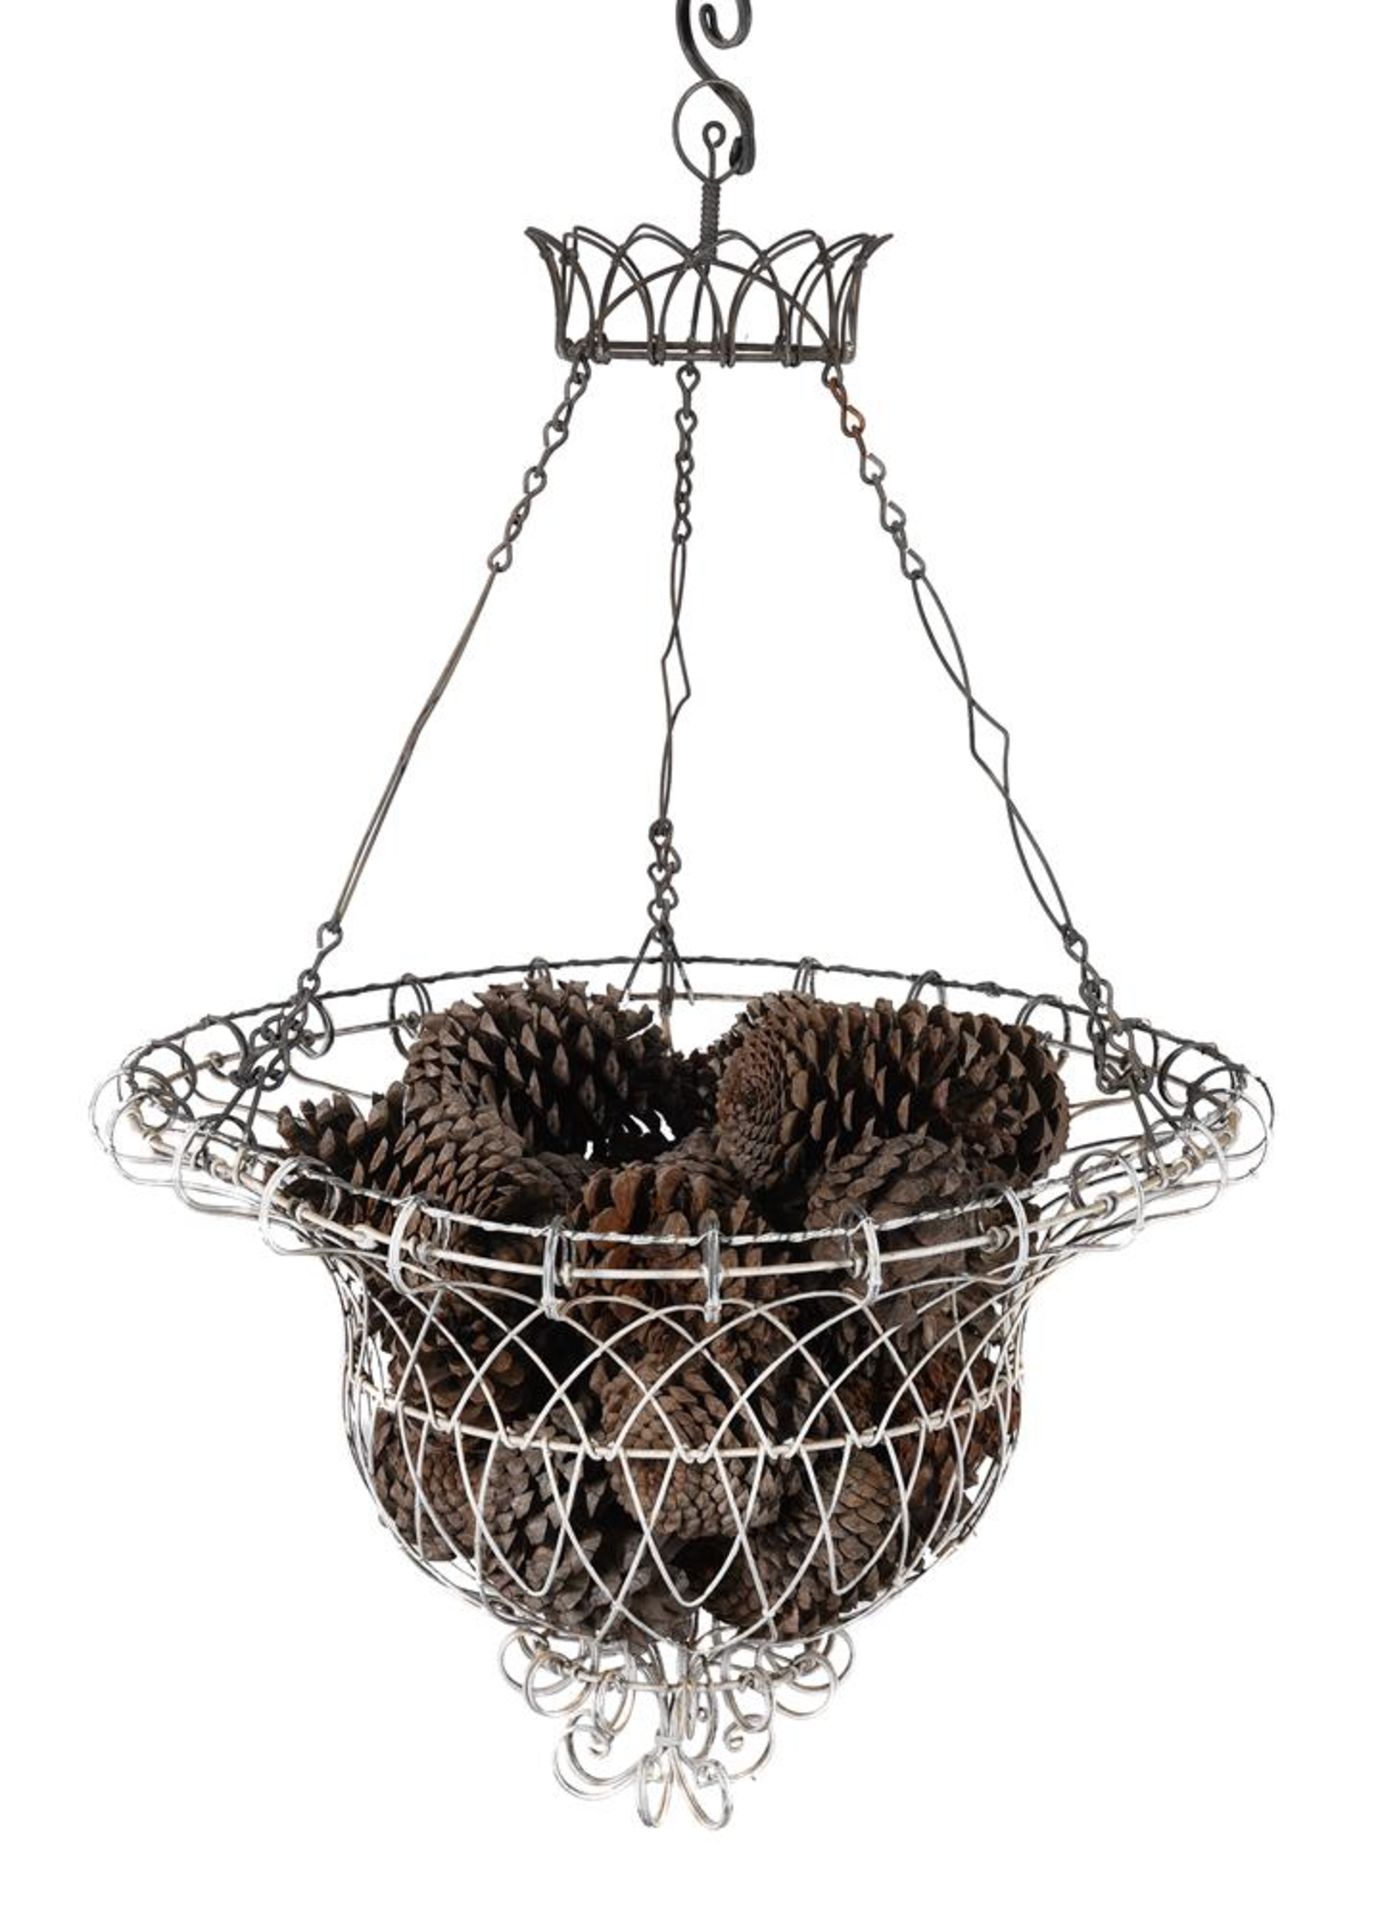 A WHITE PAINTED WIREWORK HANGING BASKET CENTREPIECE IN VICTORIAN STYLE, 20TH CENTURY